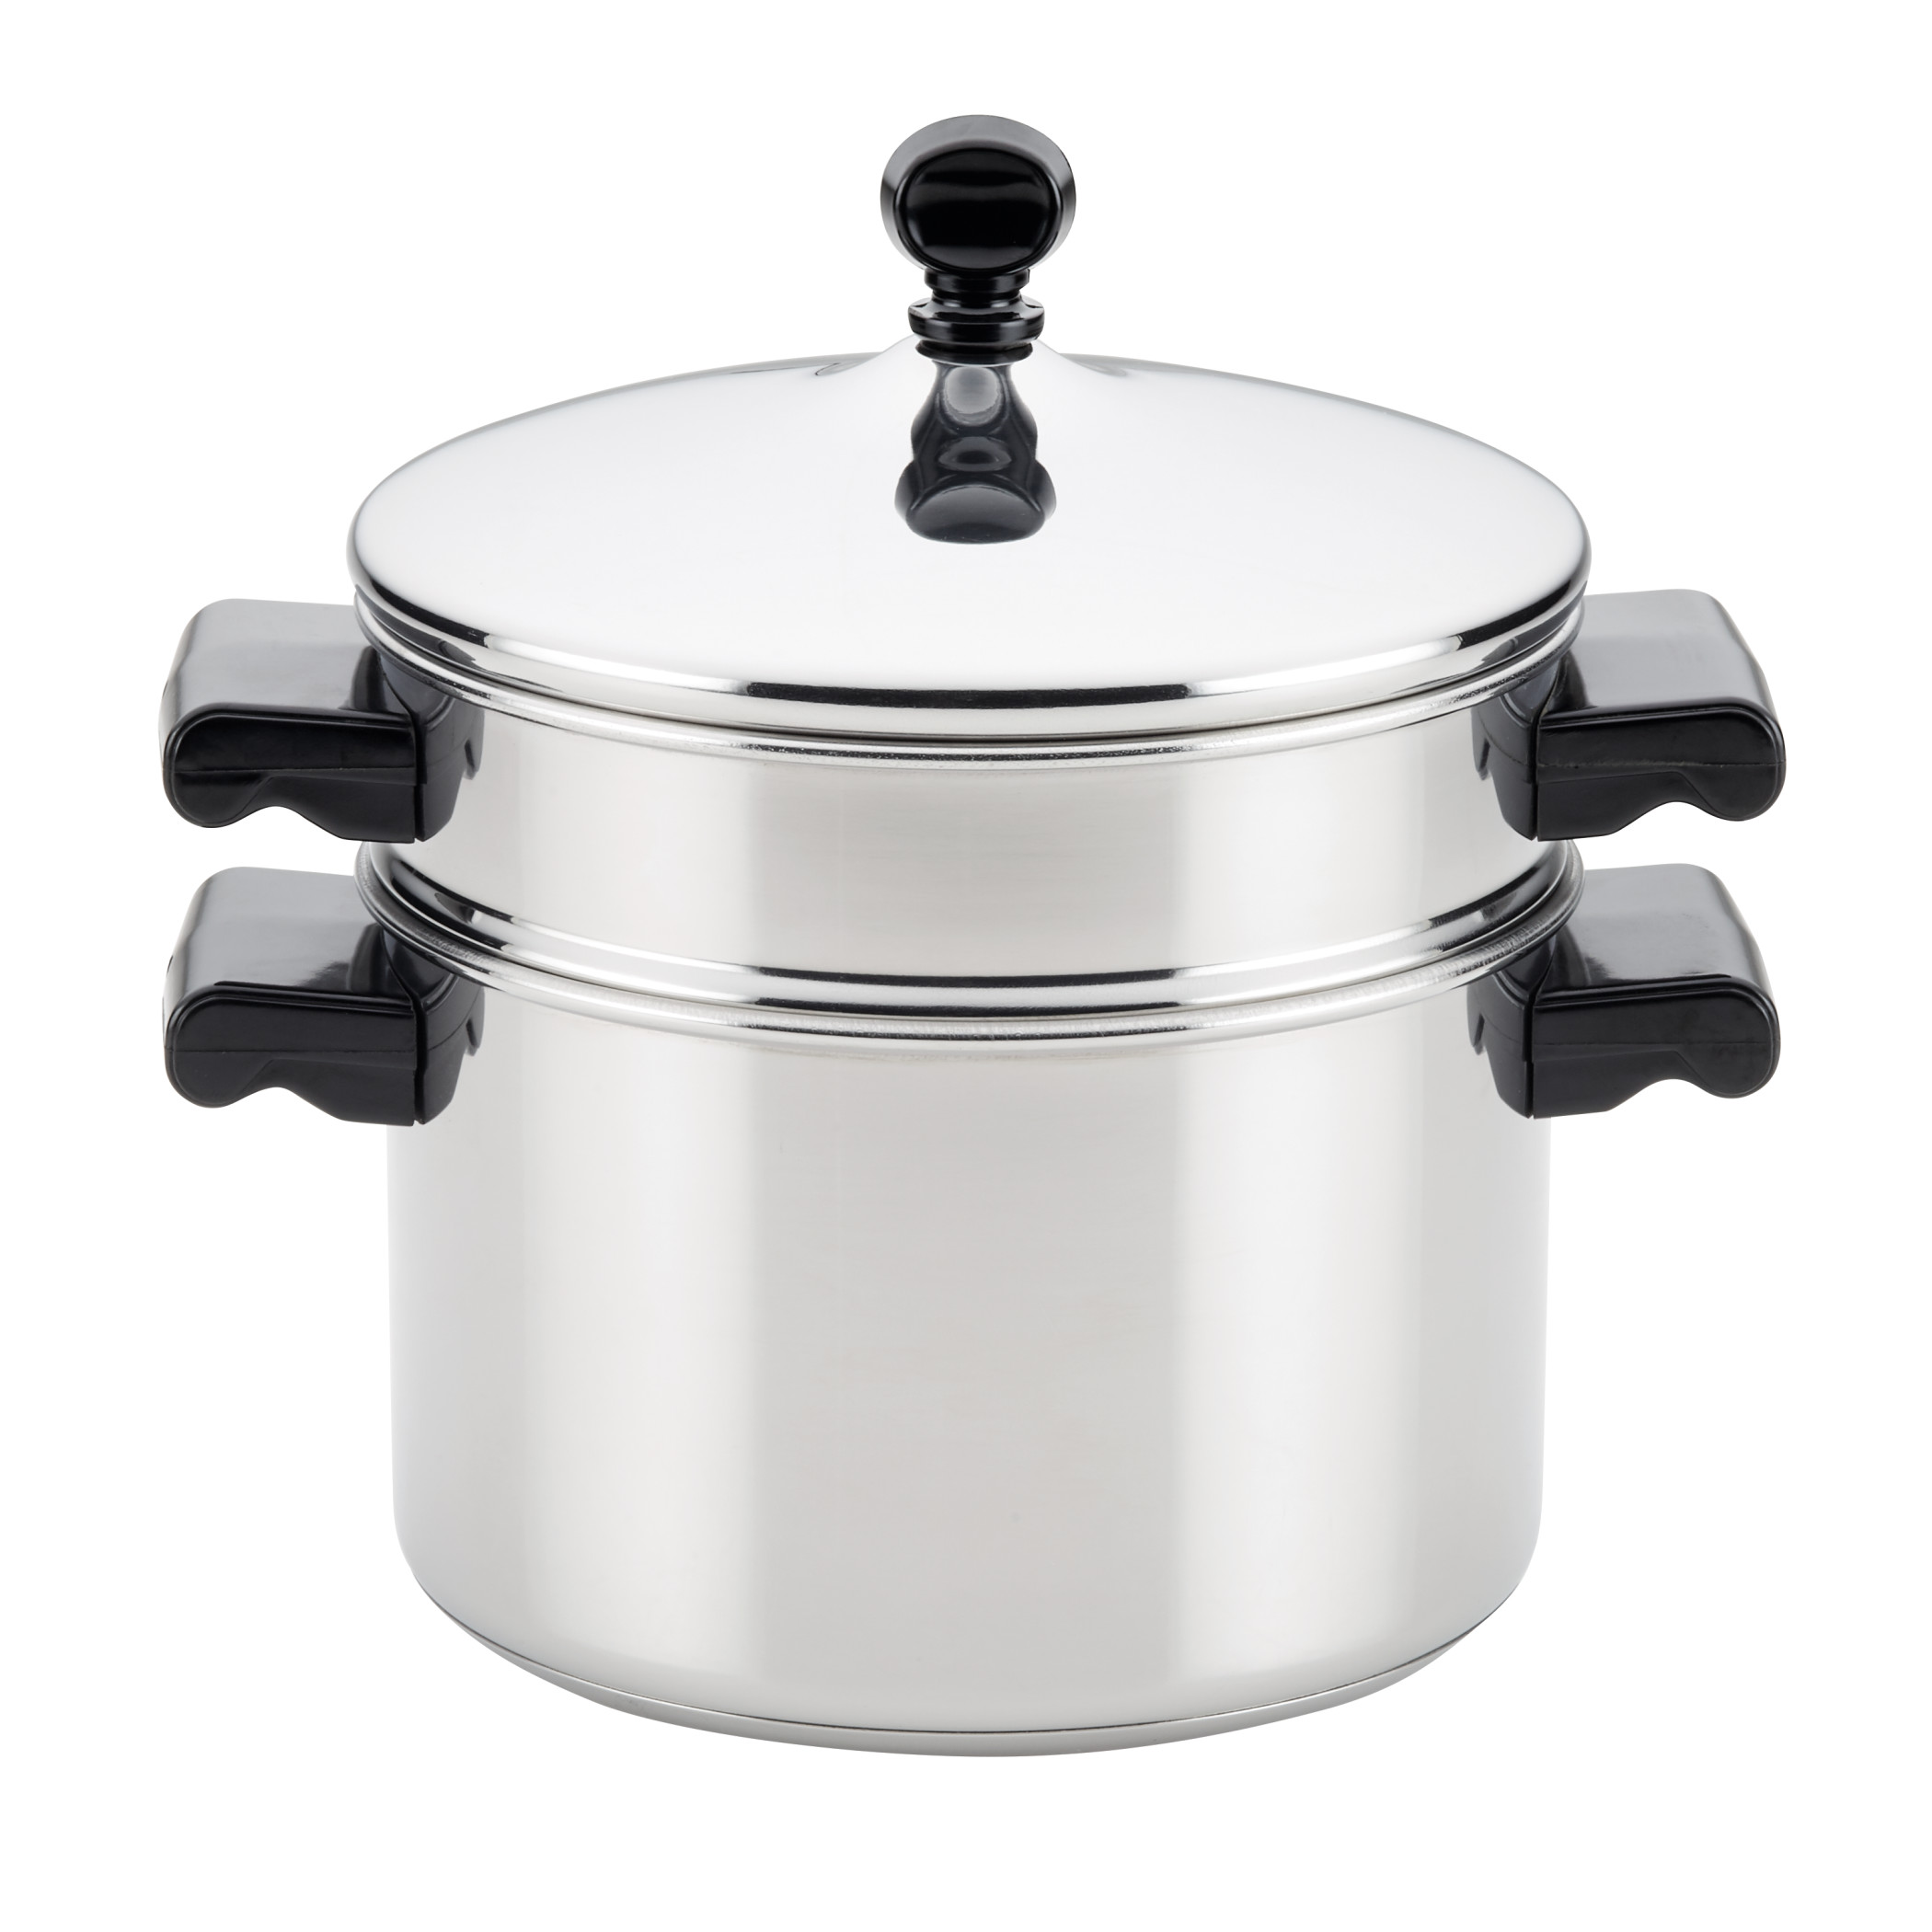 Farberware Classic Stainless Steel Stack 'n' Steam Saucepot and Steamer, 3-Quart - image 1 of 3